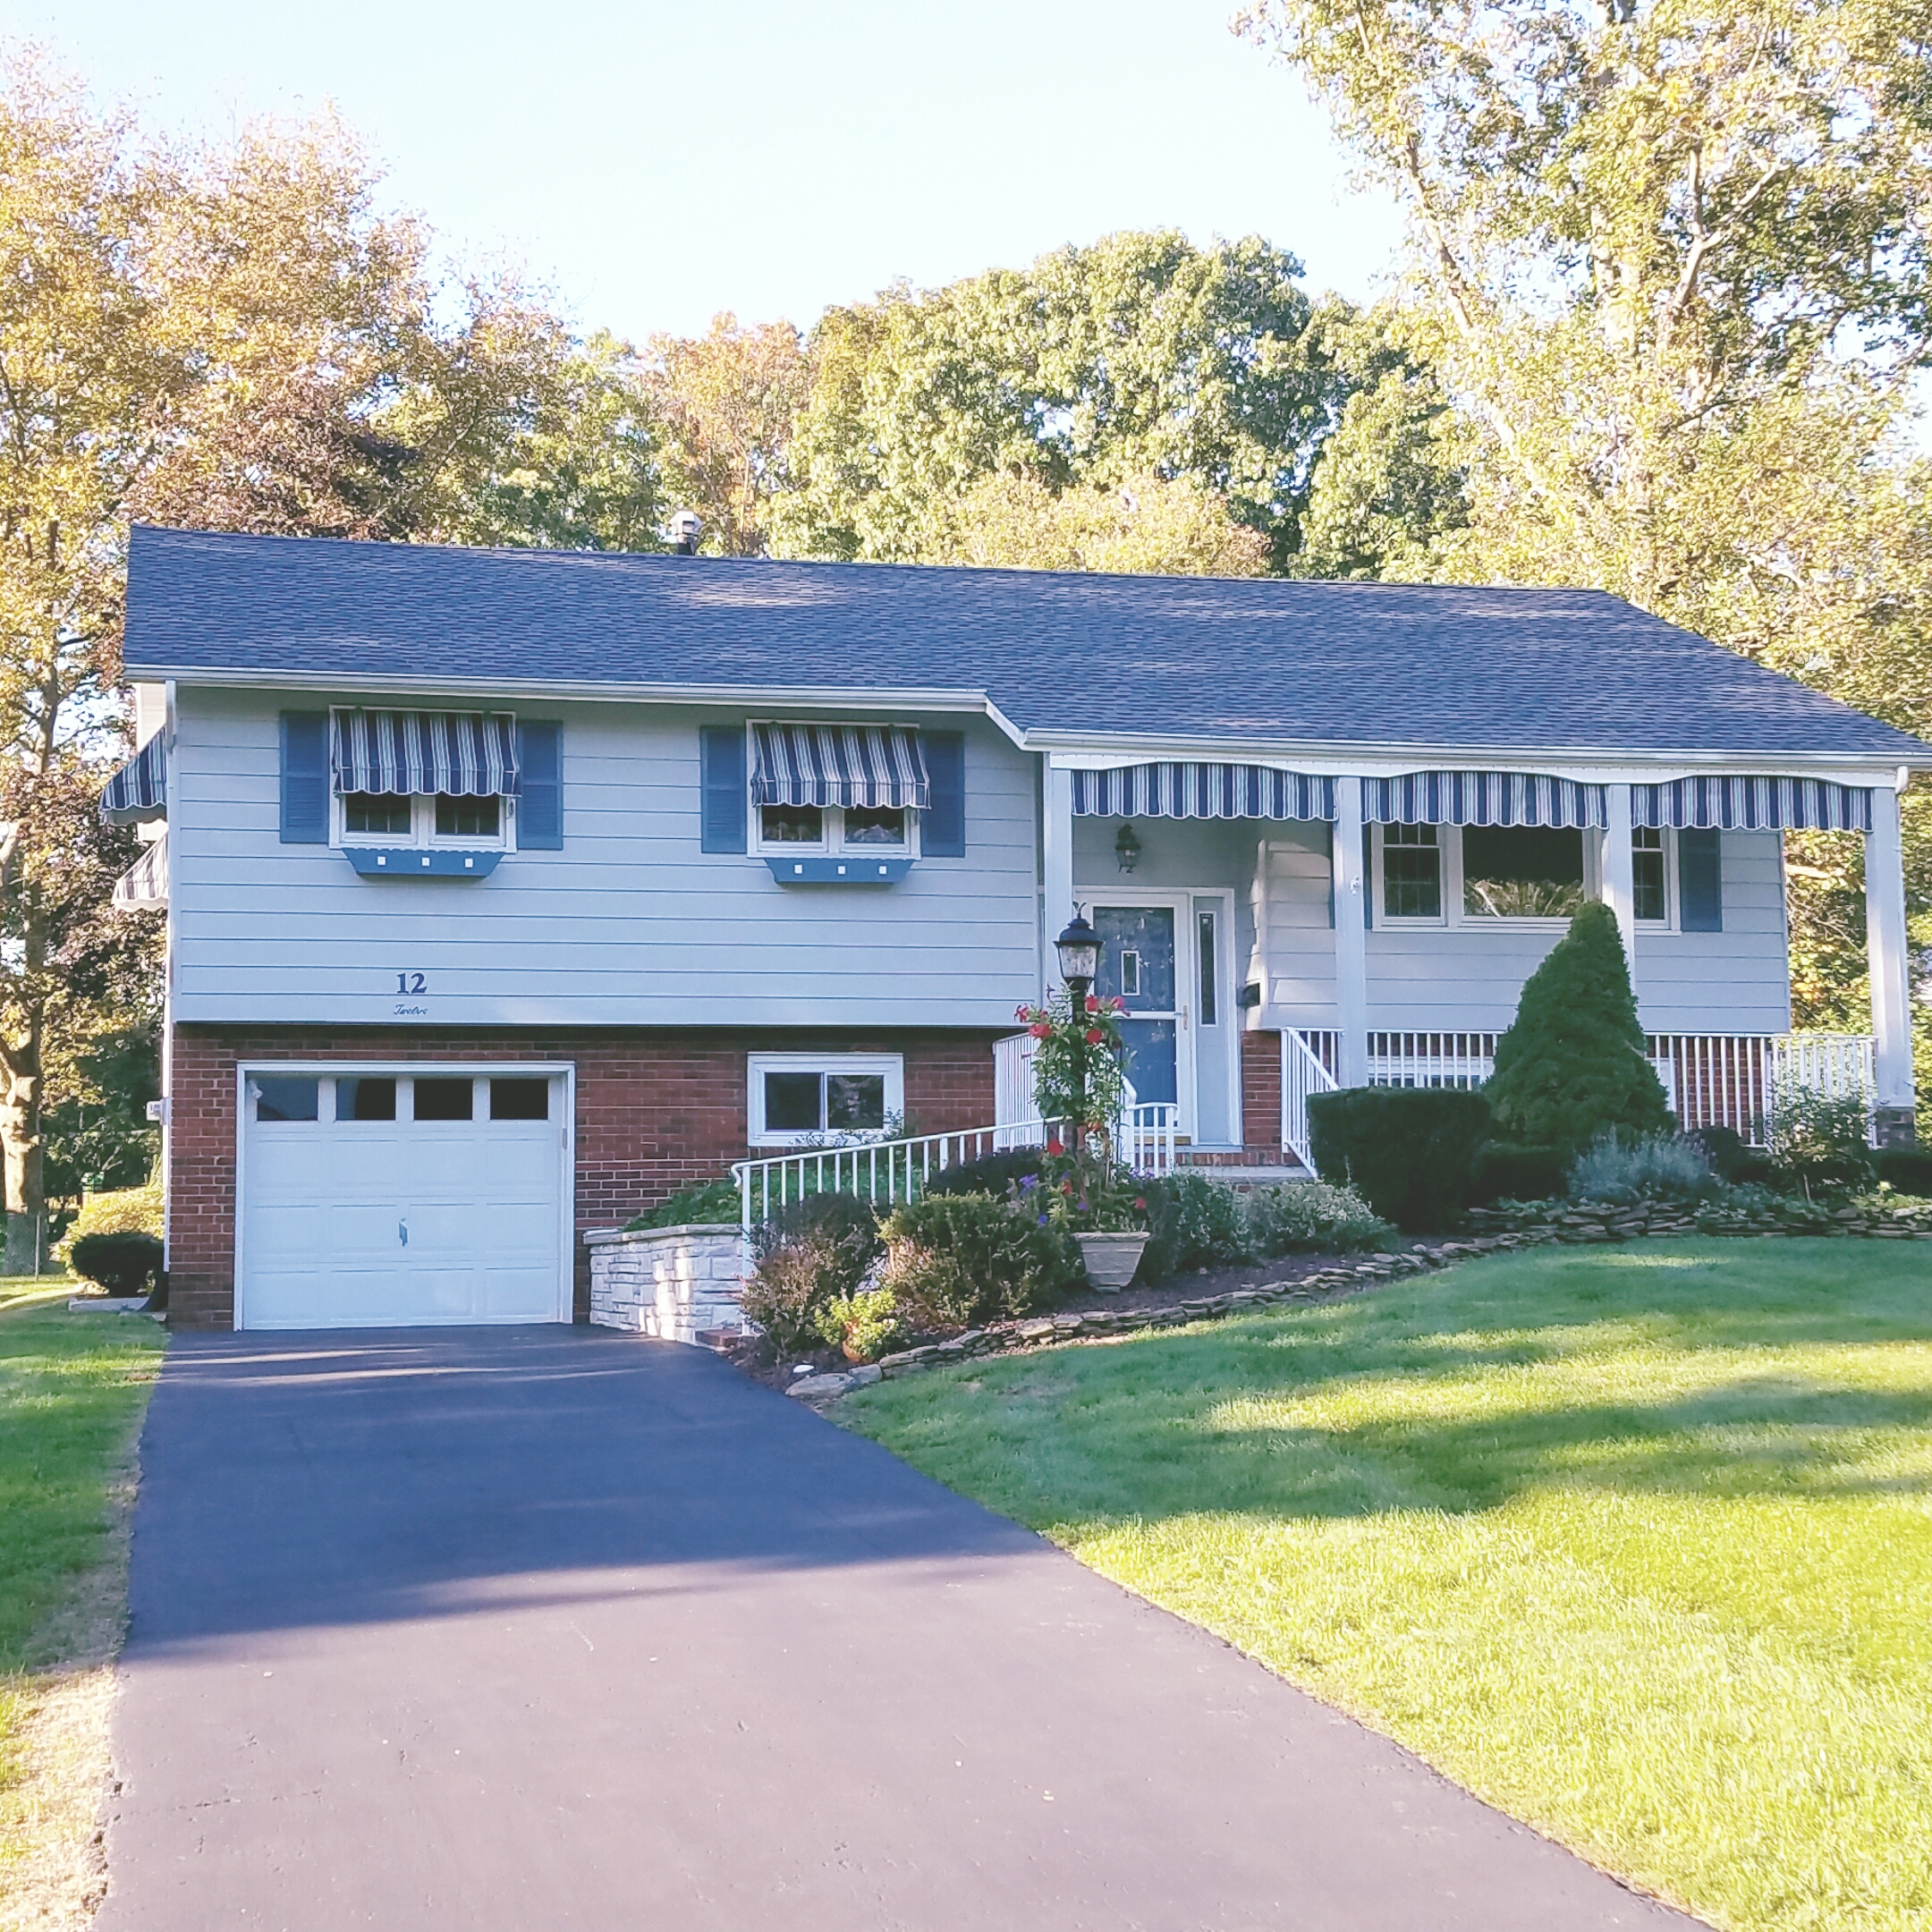 12 Heather Drive, Manalapan<br />Sold $432,450